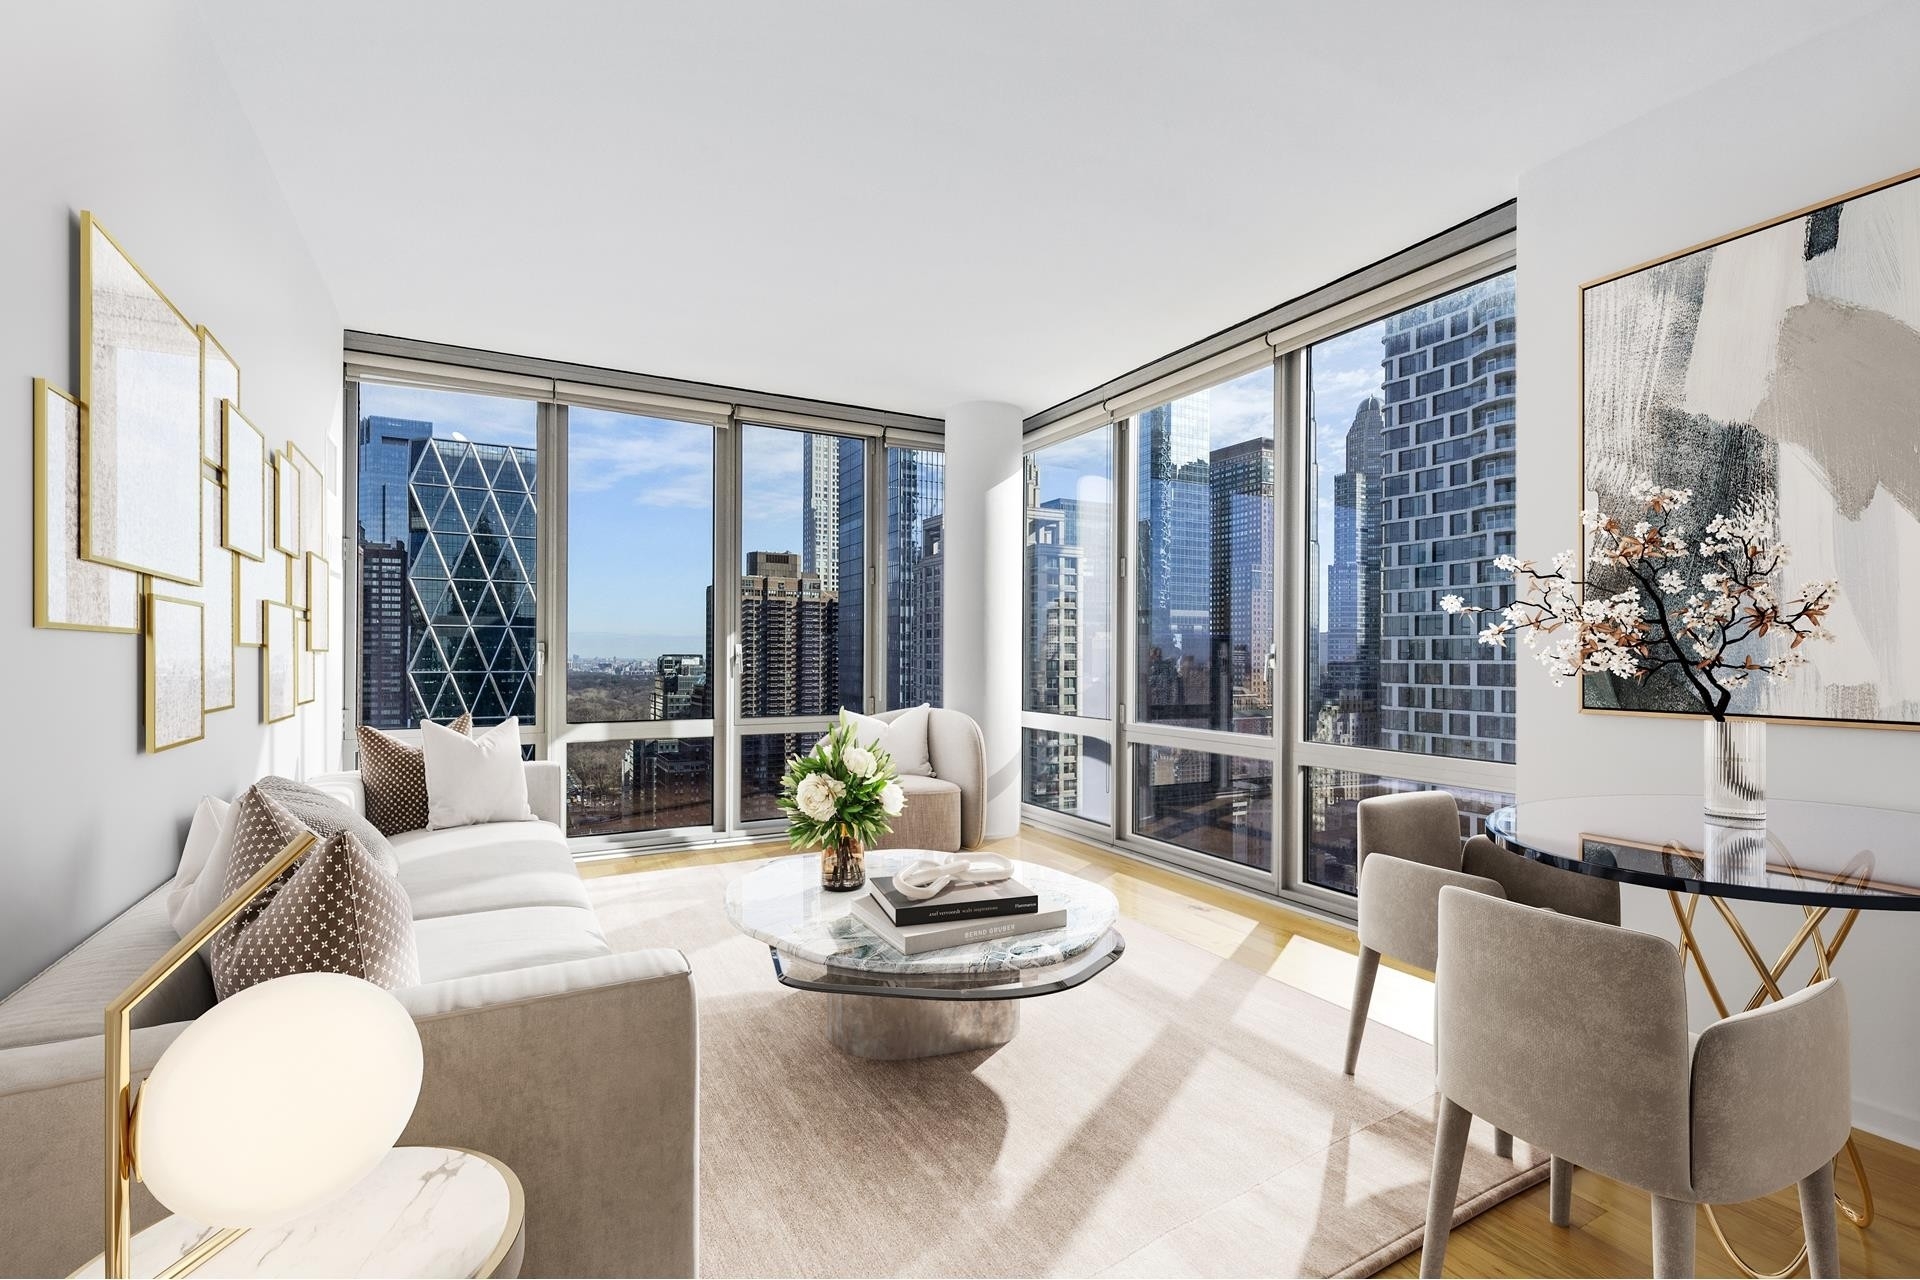 Property at The Link, 310 W 52ND ST, 36J Hell's Kitchen, New York, New York 10019